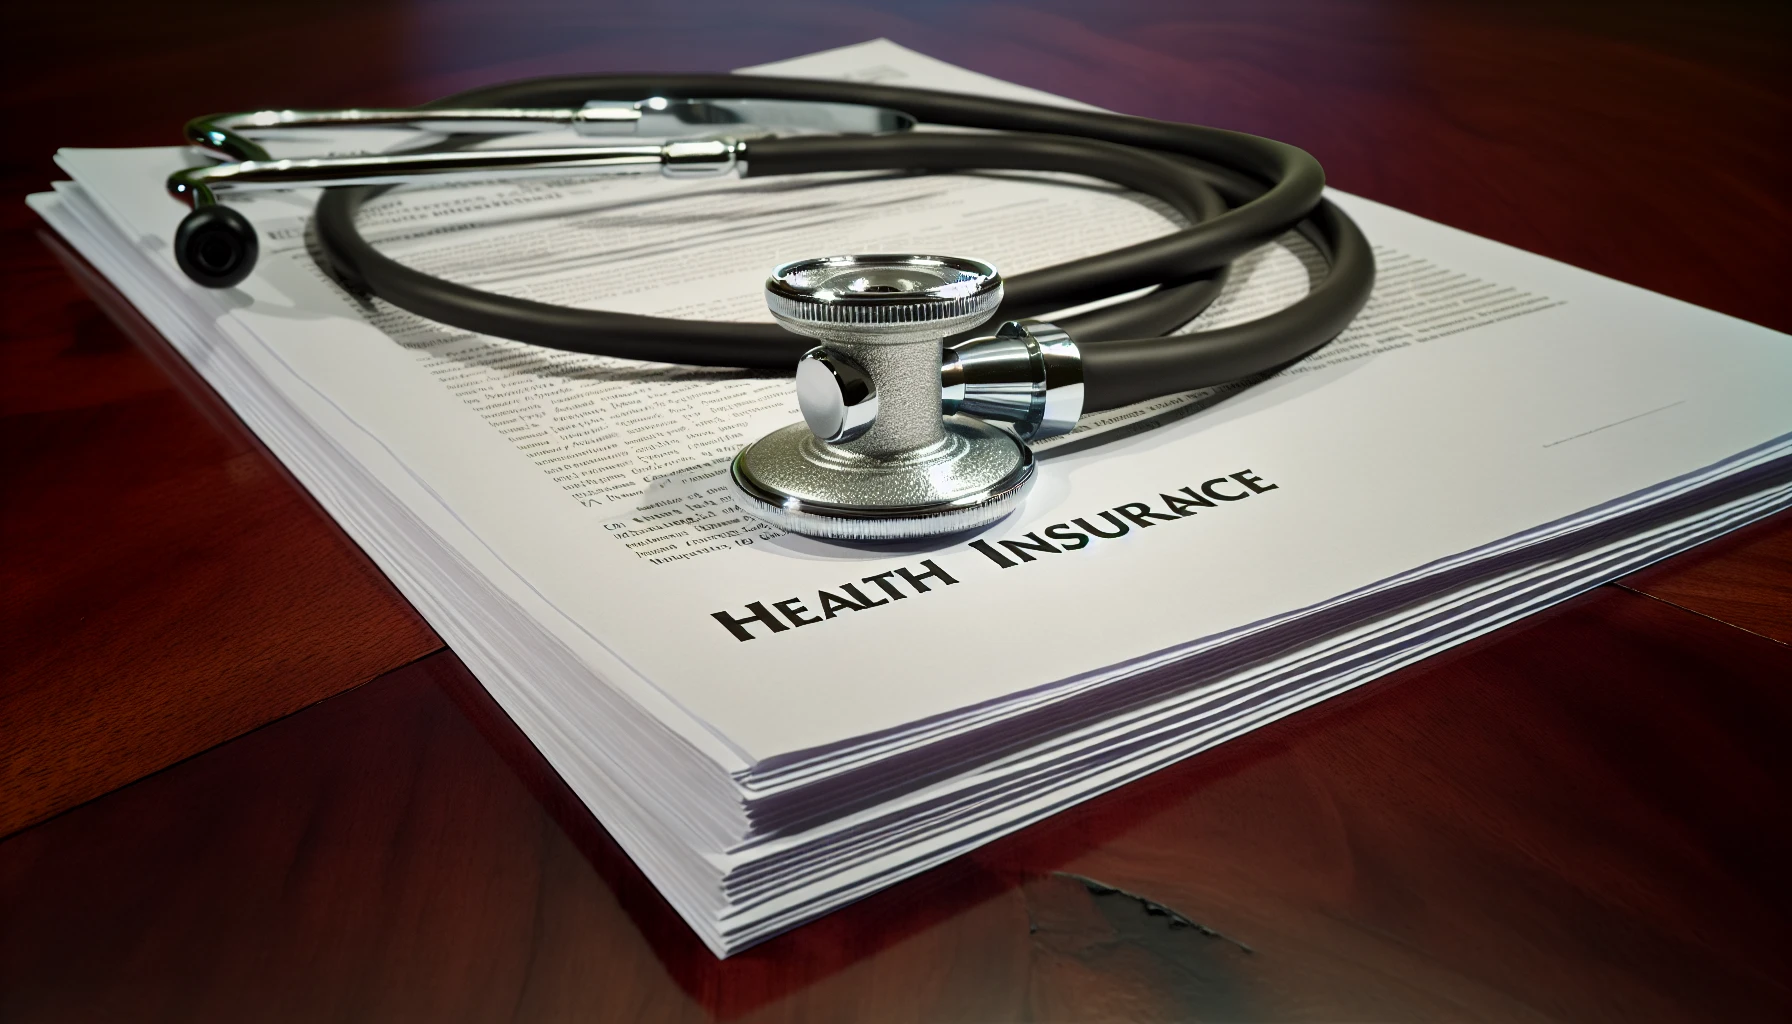 Health insurance policy documents and a stethoscope